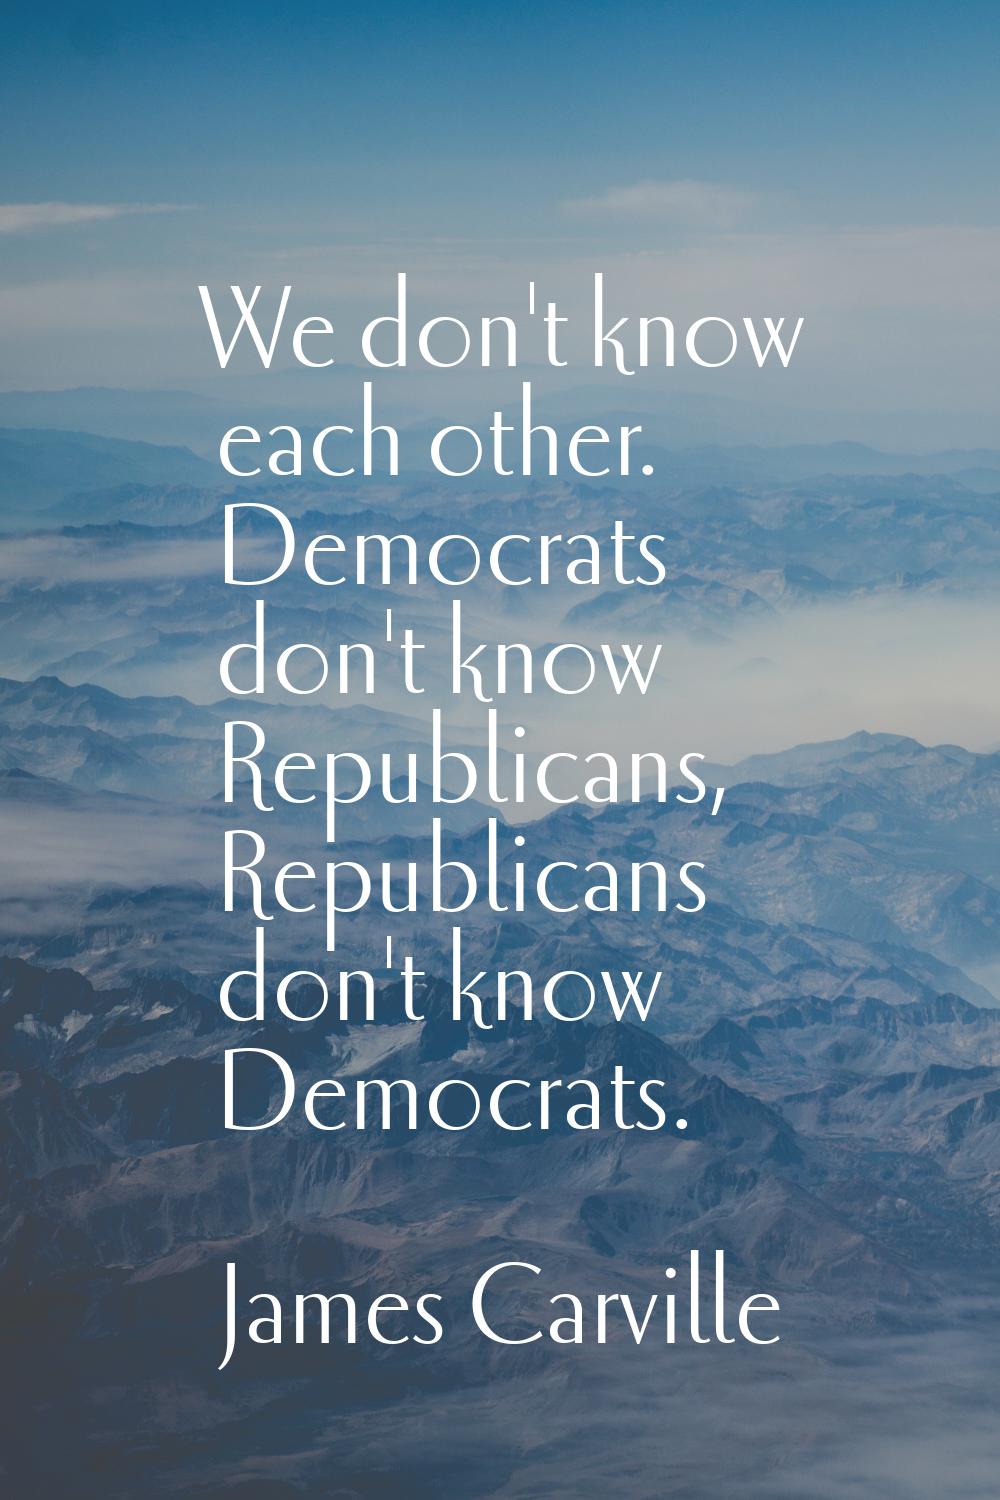 We don't know each other. Democrats don't know Republicans, Republicans don't know Democrats.